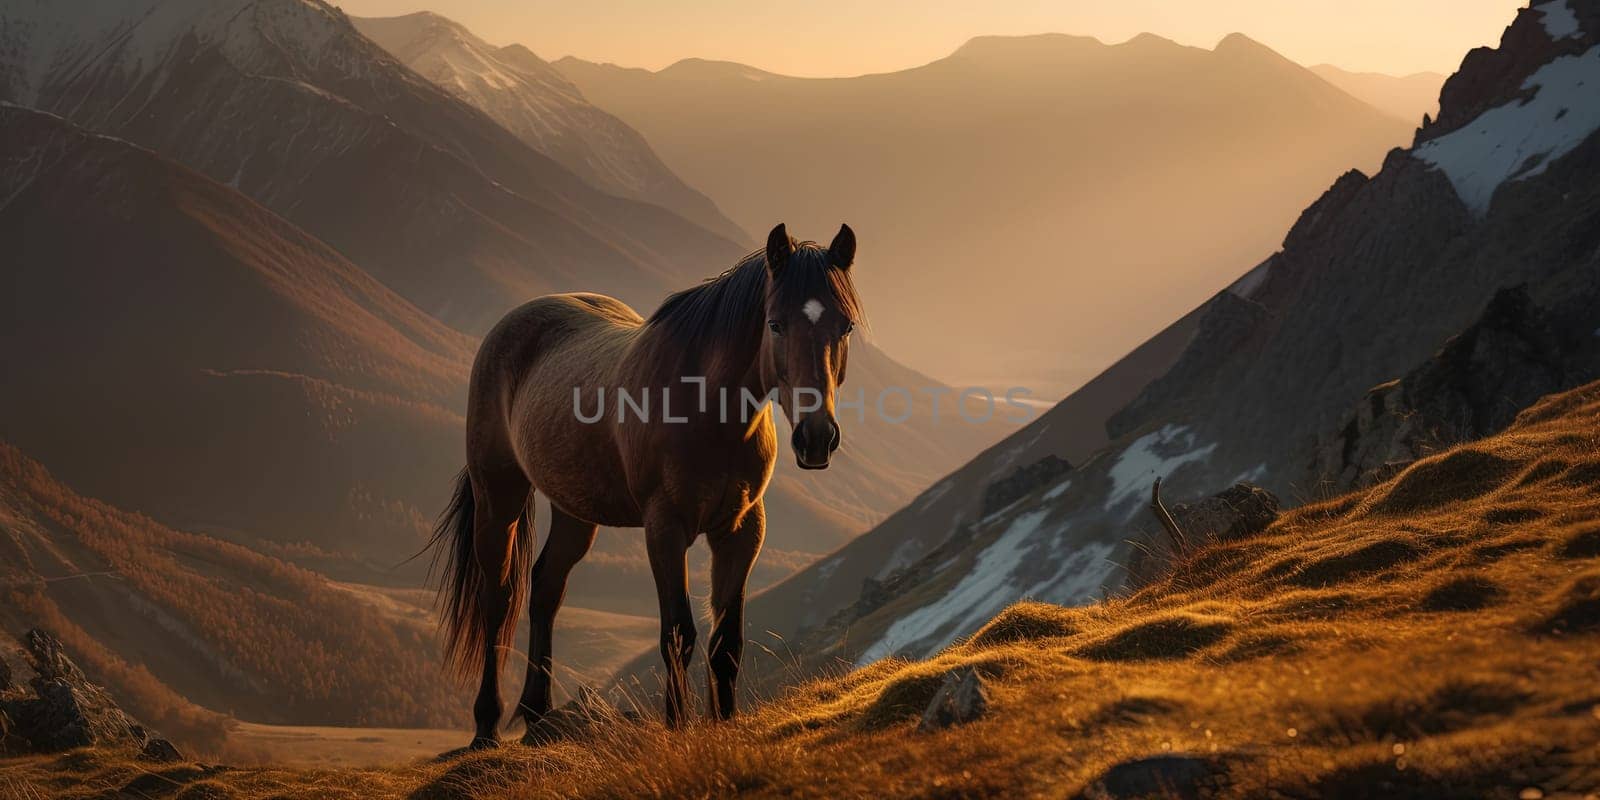 Beautiful Domestic Horse In A Valley Against Amazing Mountain Landscape View by GekaSkr